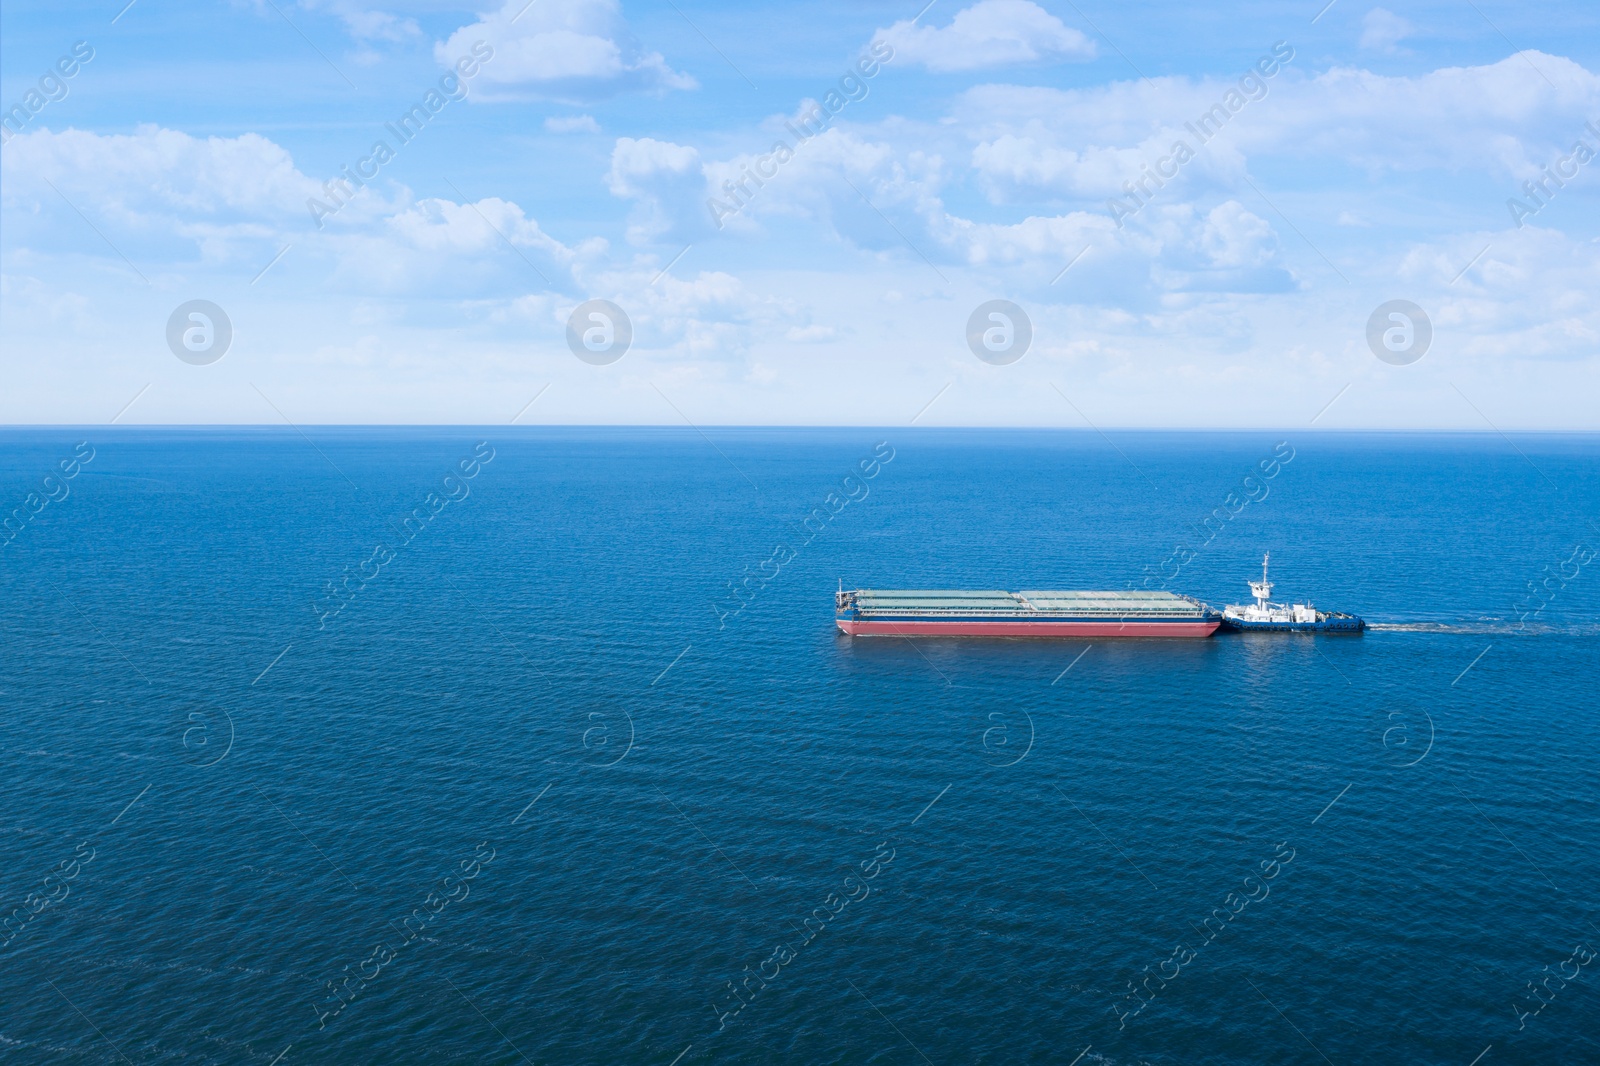 Image of Tugboat pulling barge with cargo by water, aerial view